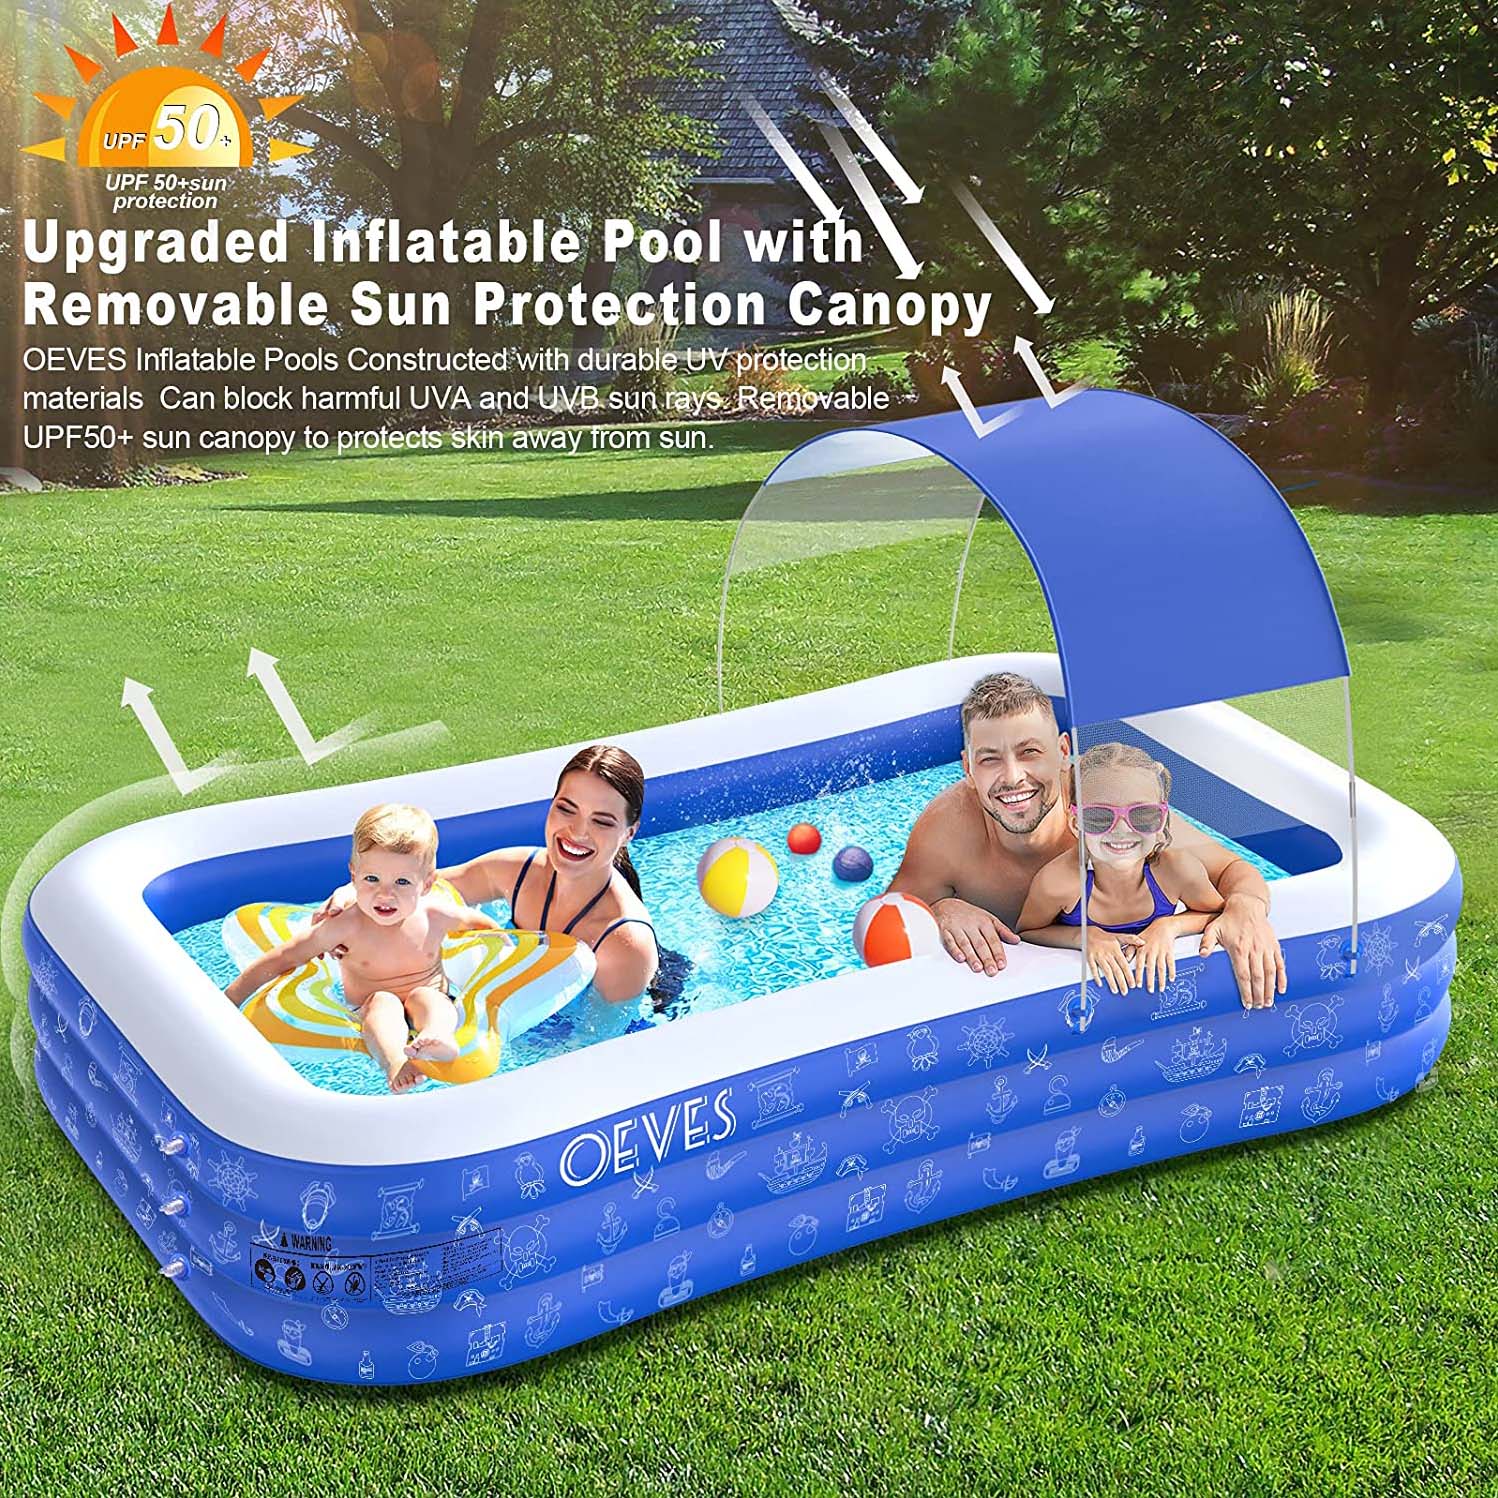 Lovinouse Inflatable Swimming Pool with Canopy One-Button Inflation Family Pool with Sunshade Canopy Summer Outdoor Water Play for Kids 83 x 59 x 27 Inch Adults 